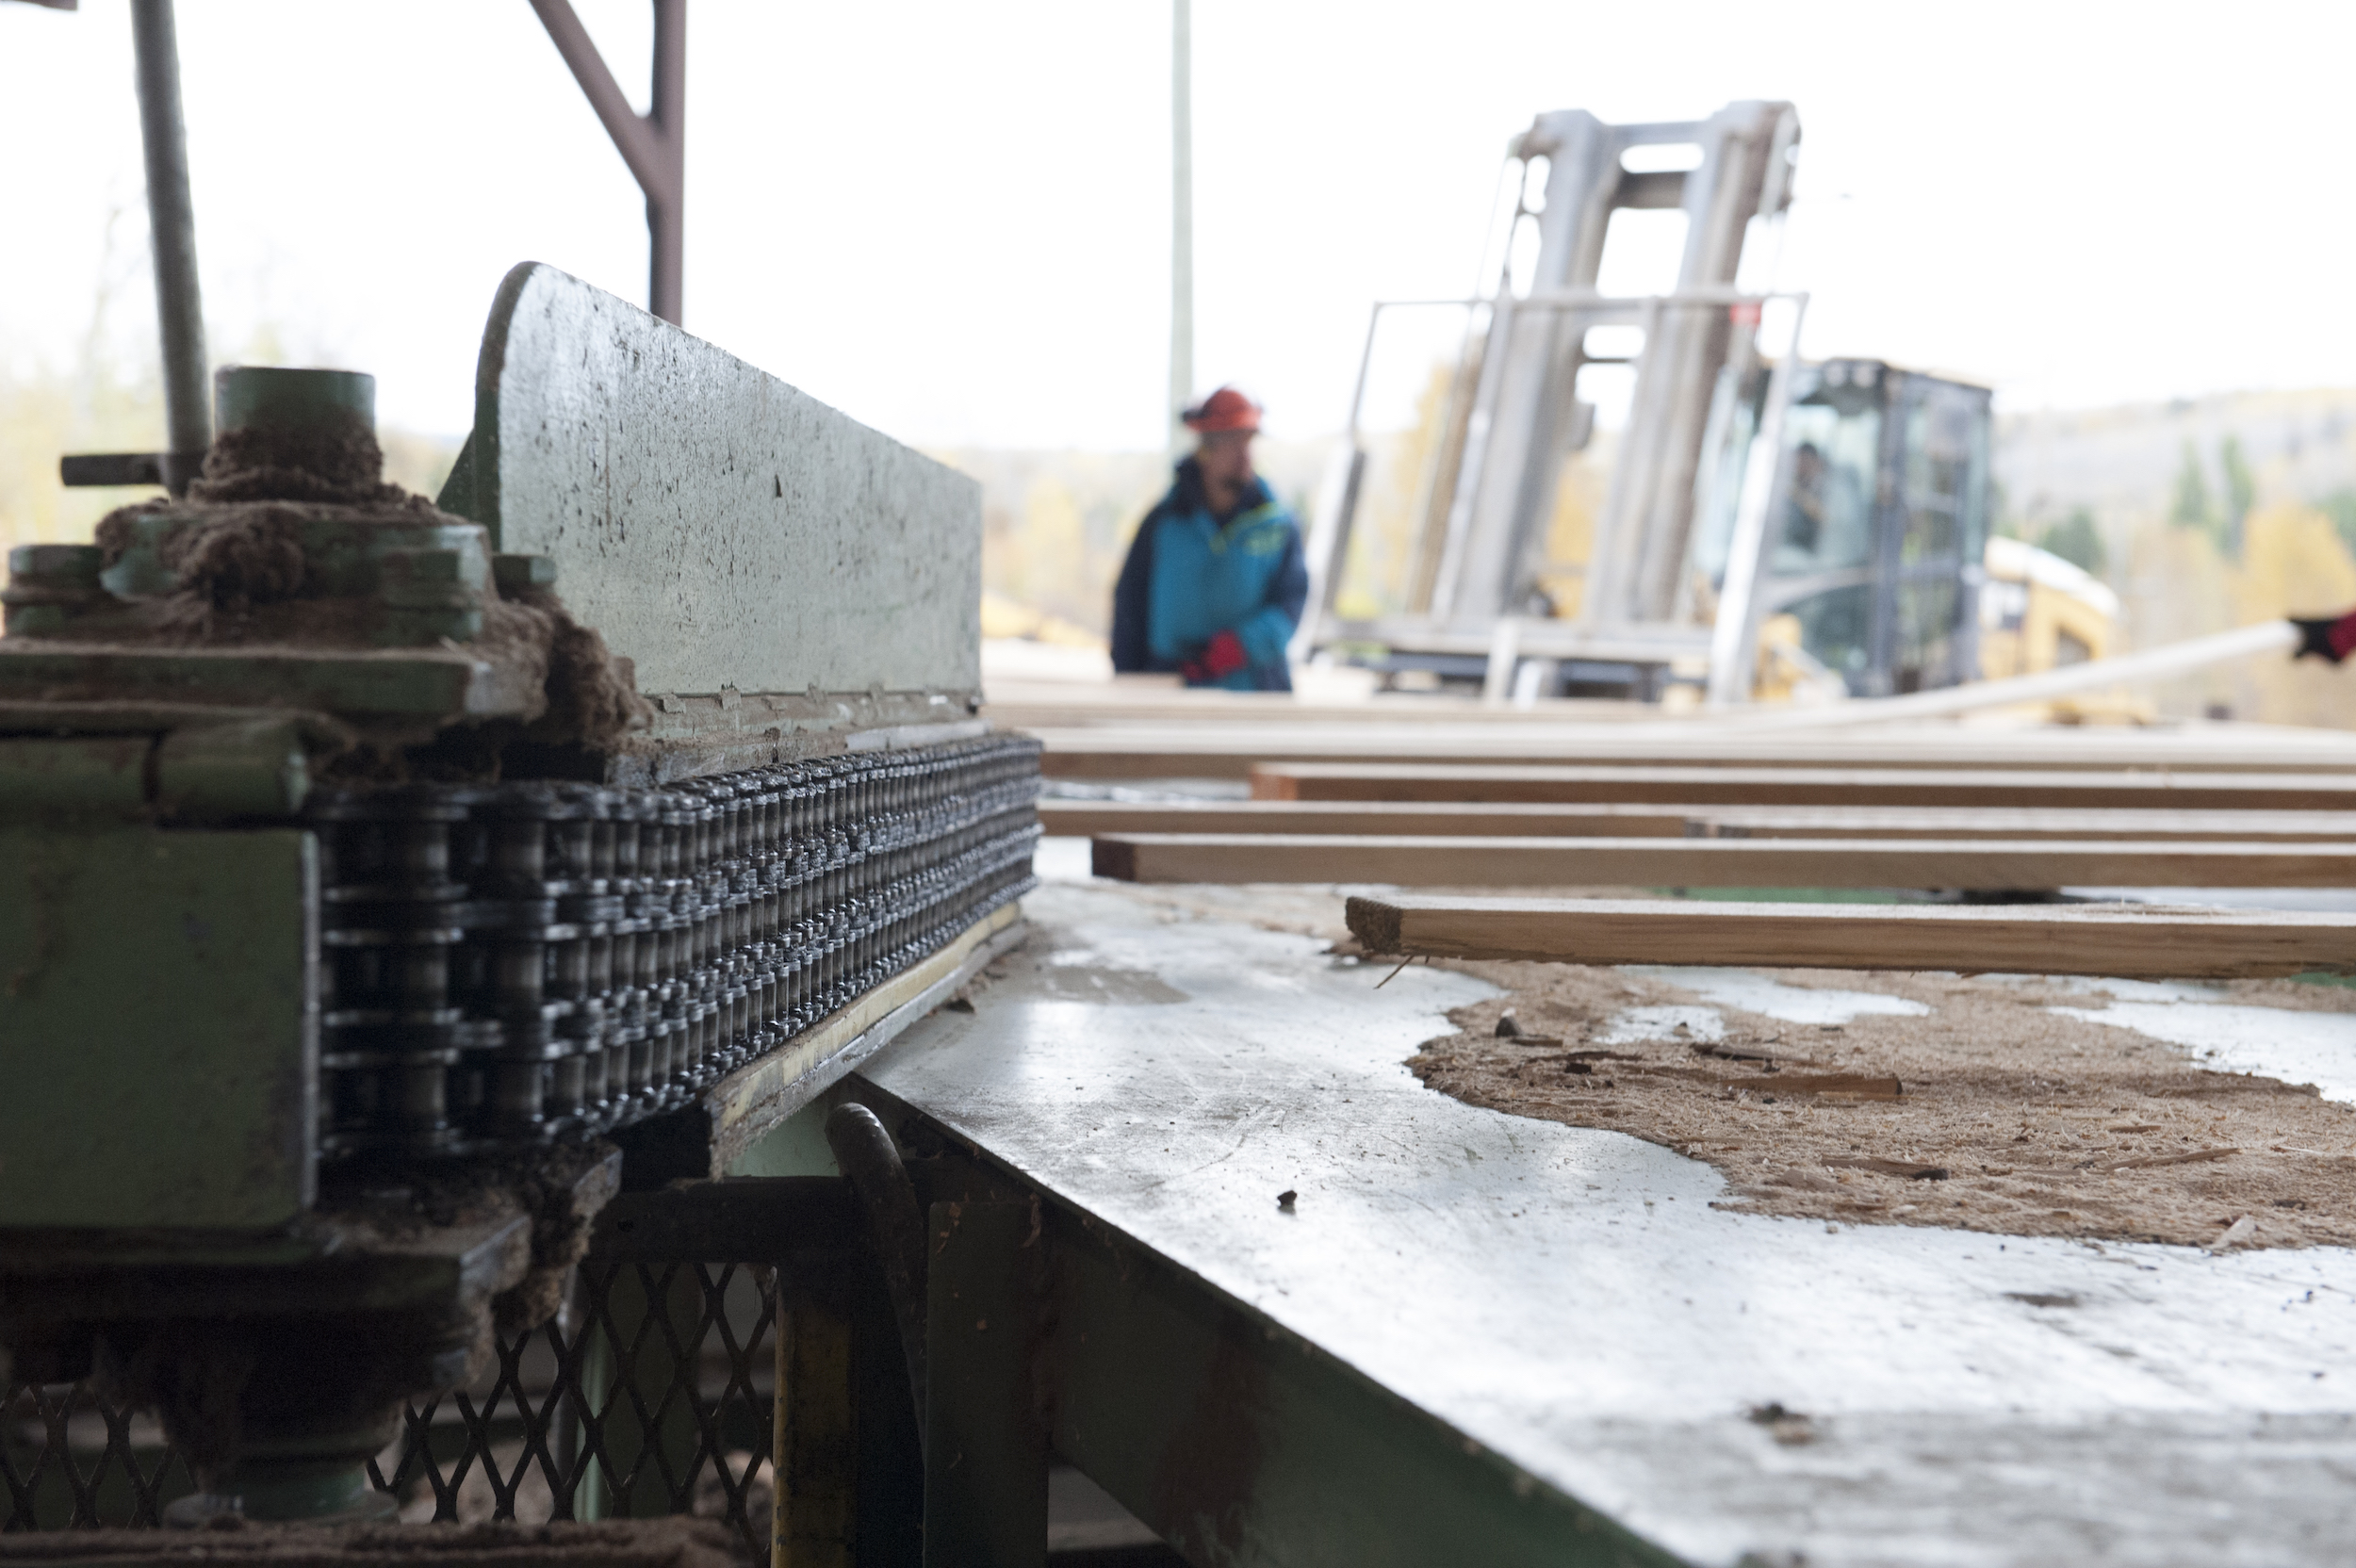 An Indigenous worker stands beside sawmill machinery In Kitwanga, B.C., with a forklift behind them